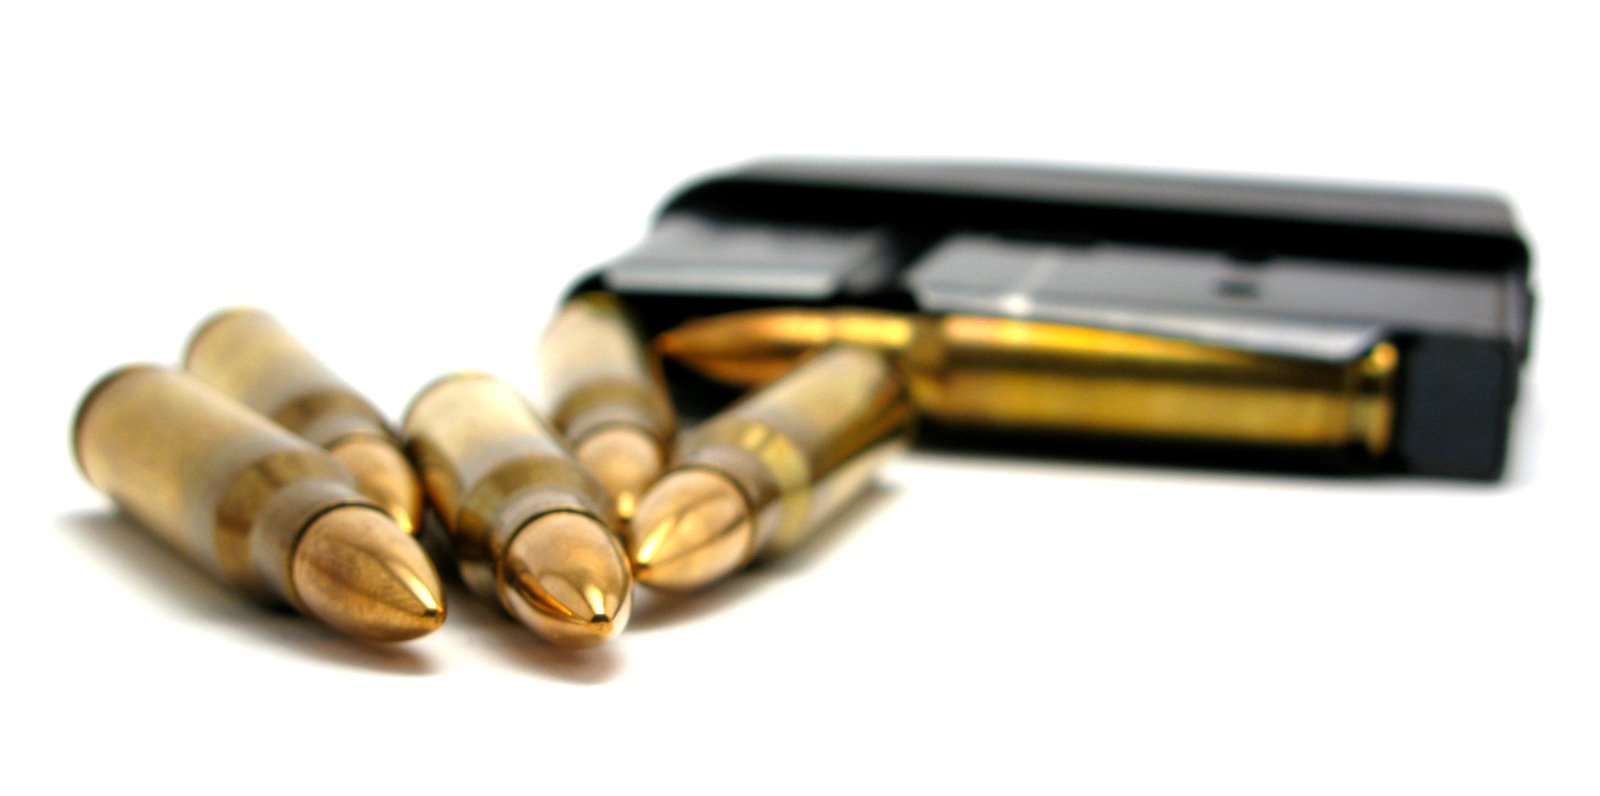 three bullet casings are laying in front of a black case